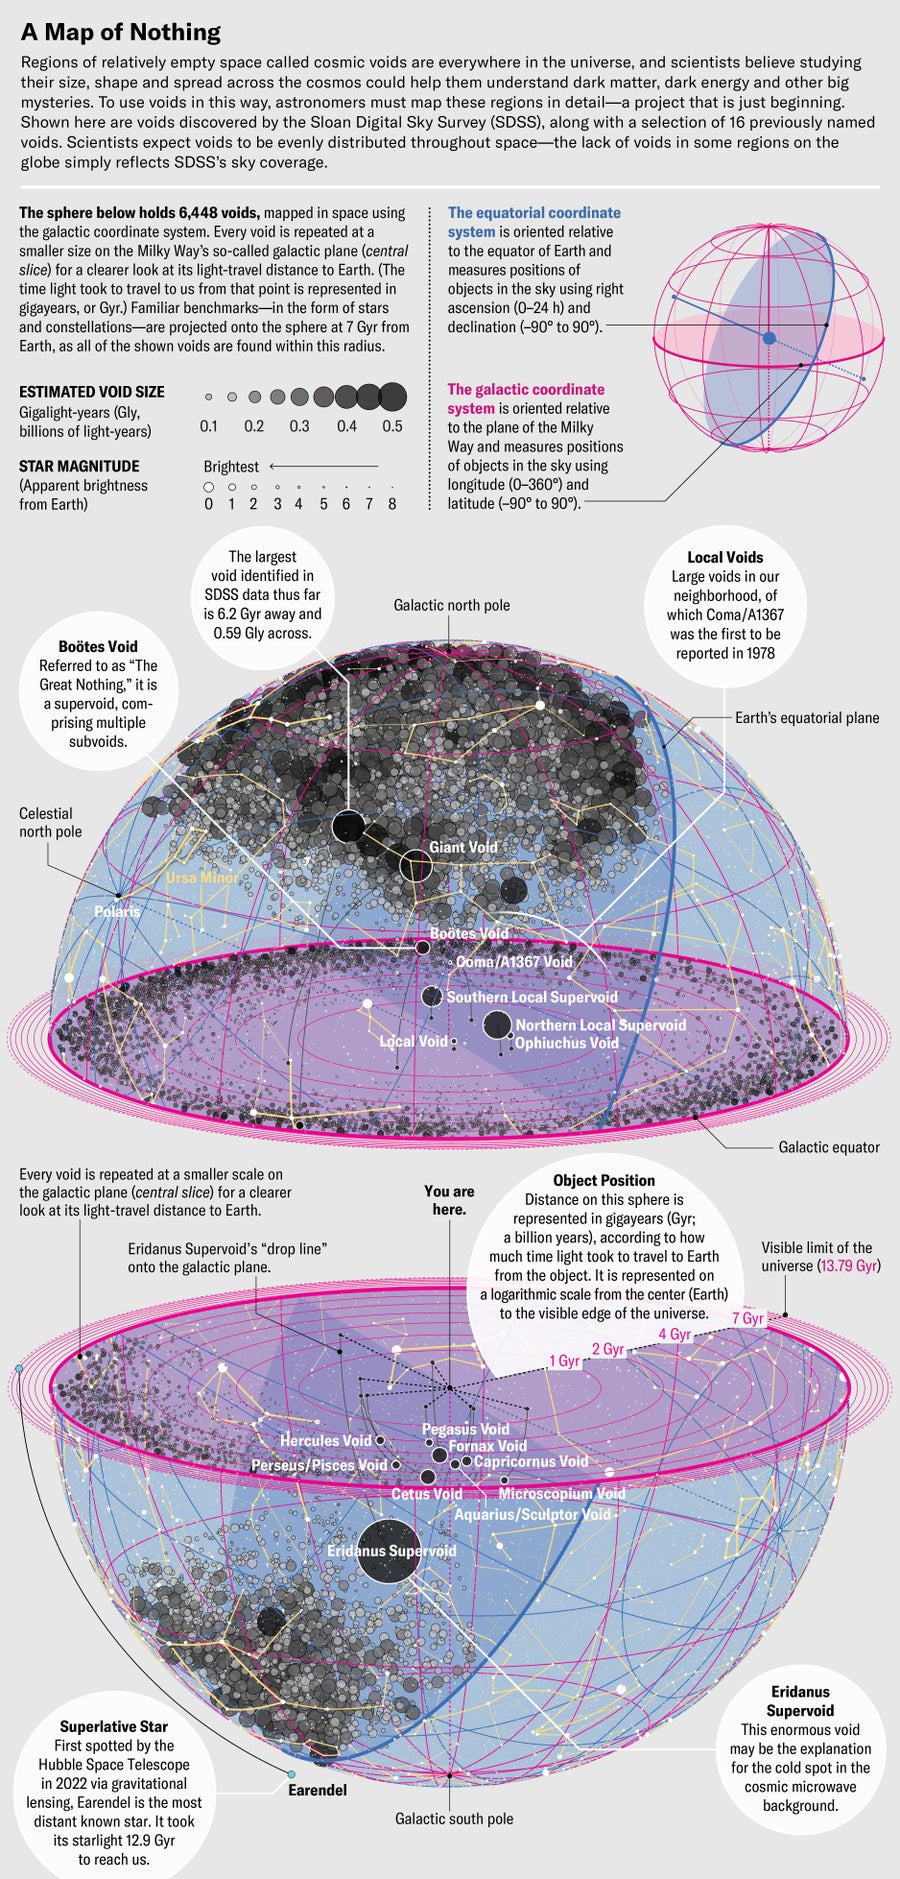 A sphere holds 6,432 voids discovered by the Sloan Digital Sky Survey—along with a selection of 16 previously named voids—mapped in space using the galactic coordinate system.